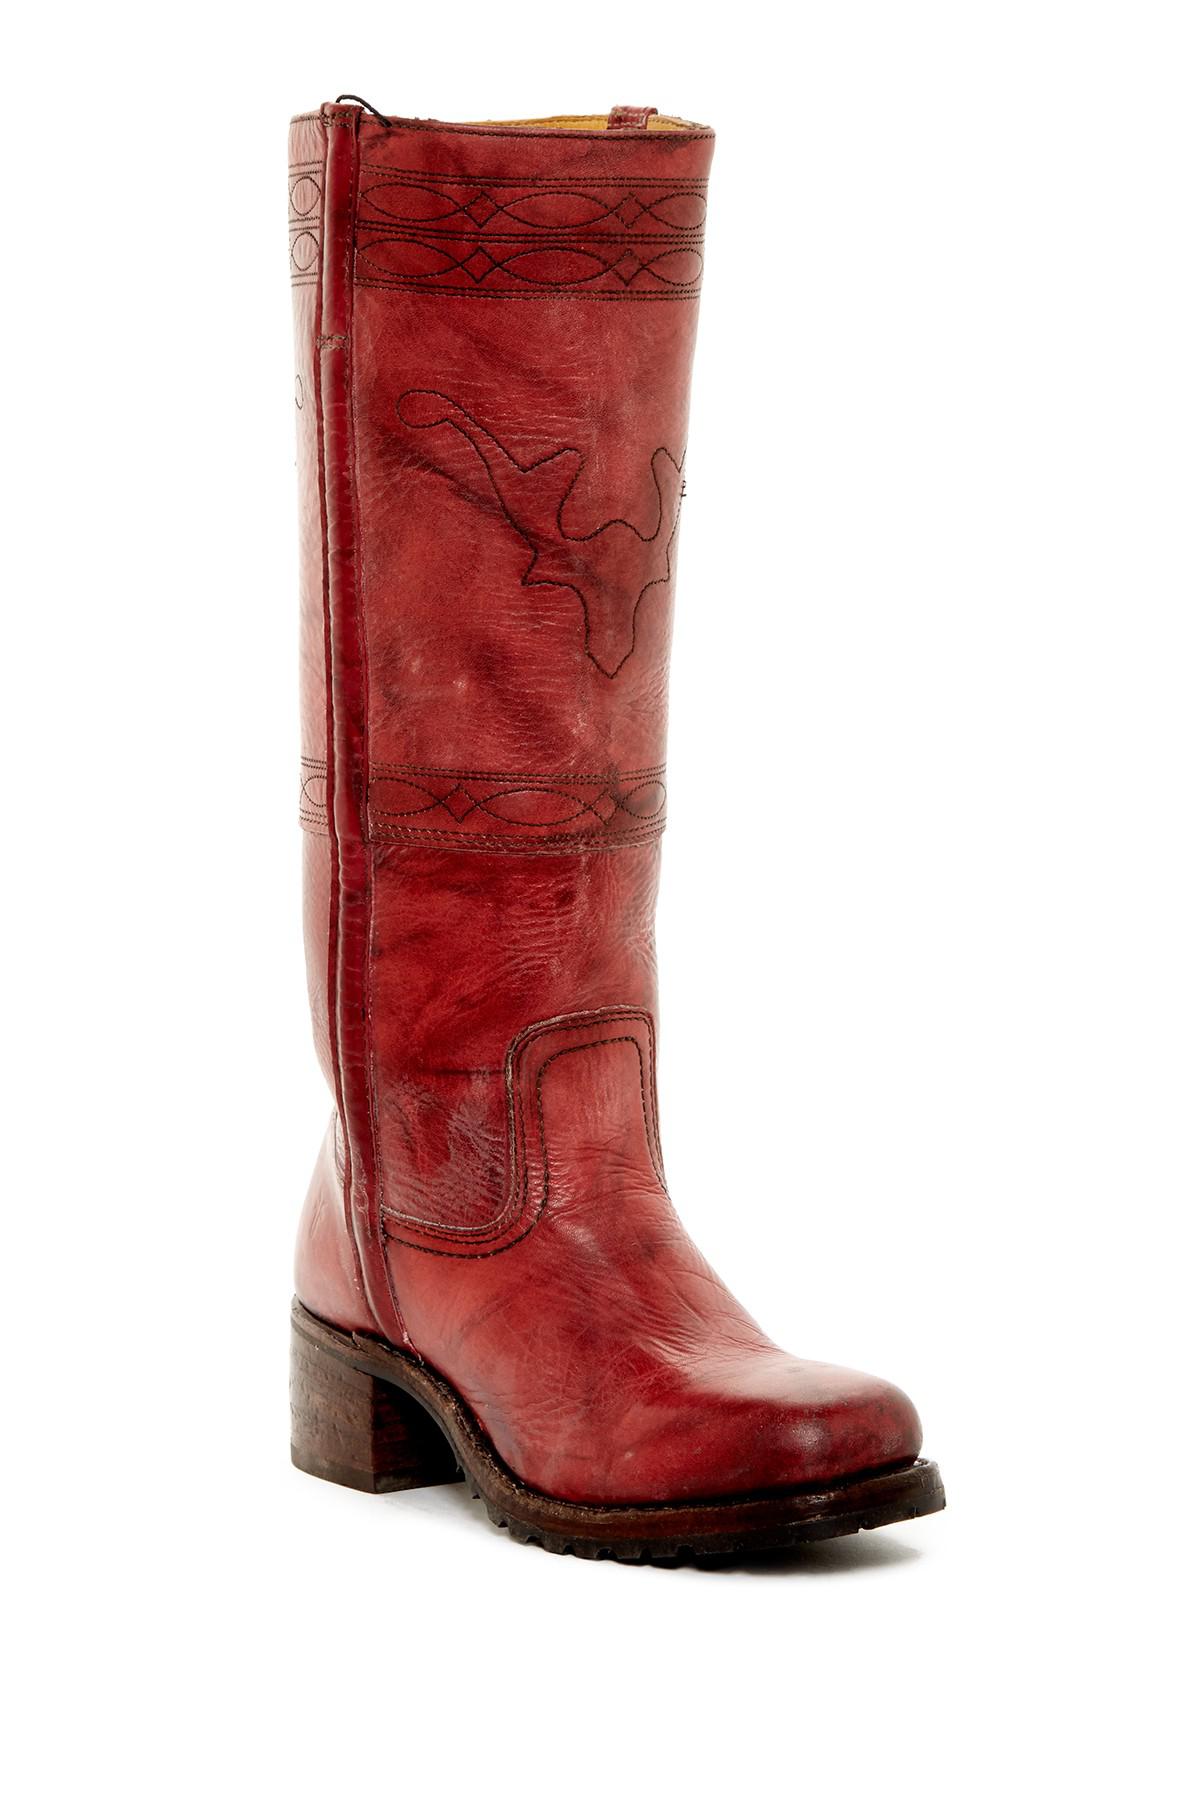 frye burnt red boots